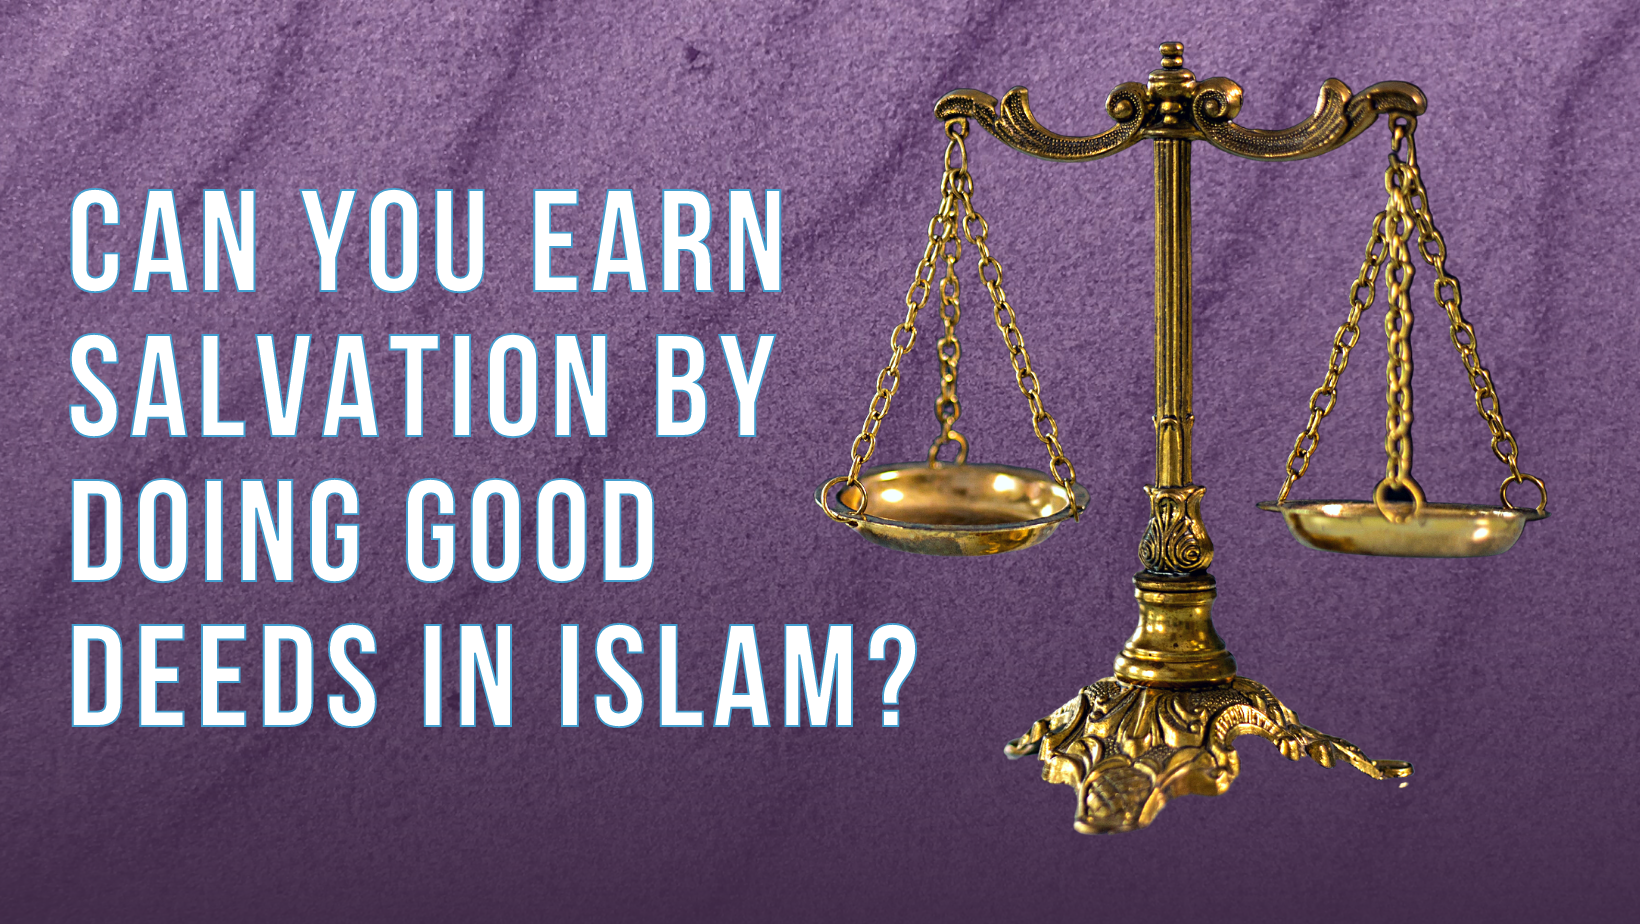 Can you earn salvation by doing good deeds in Islam?